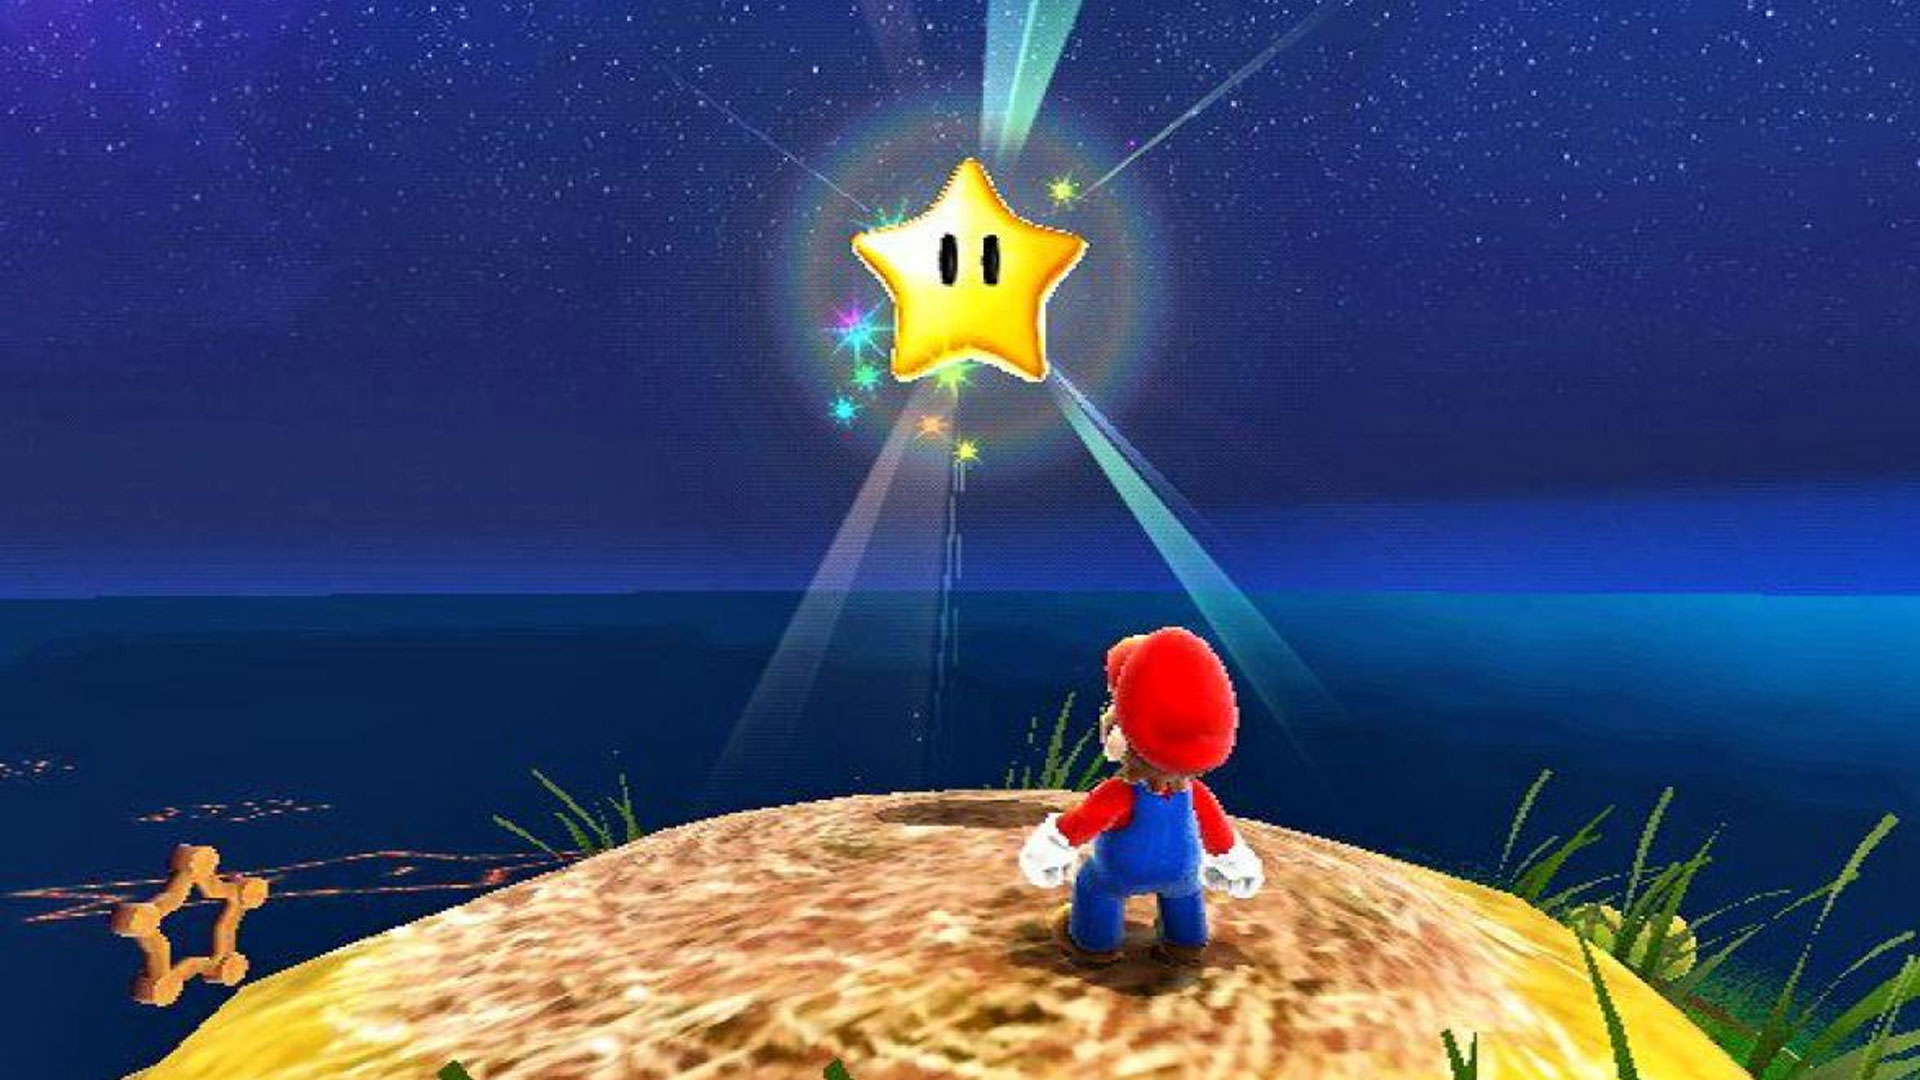 Super Mario 3D All-Stars: How to unlock all Red, Green, and Blue